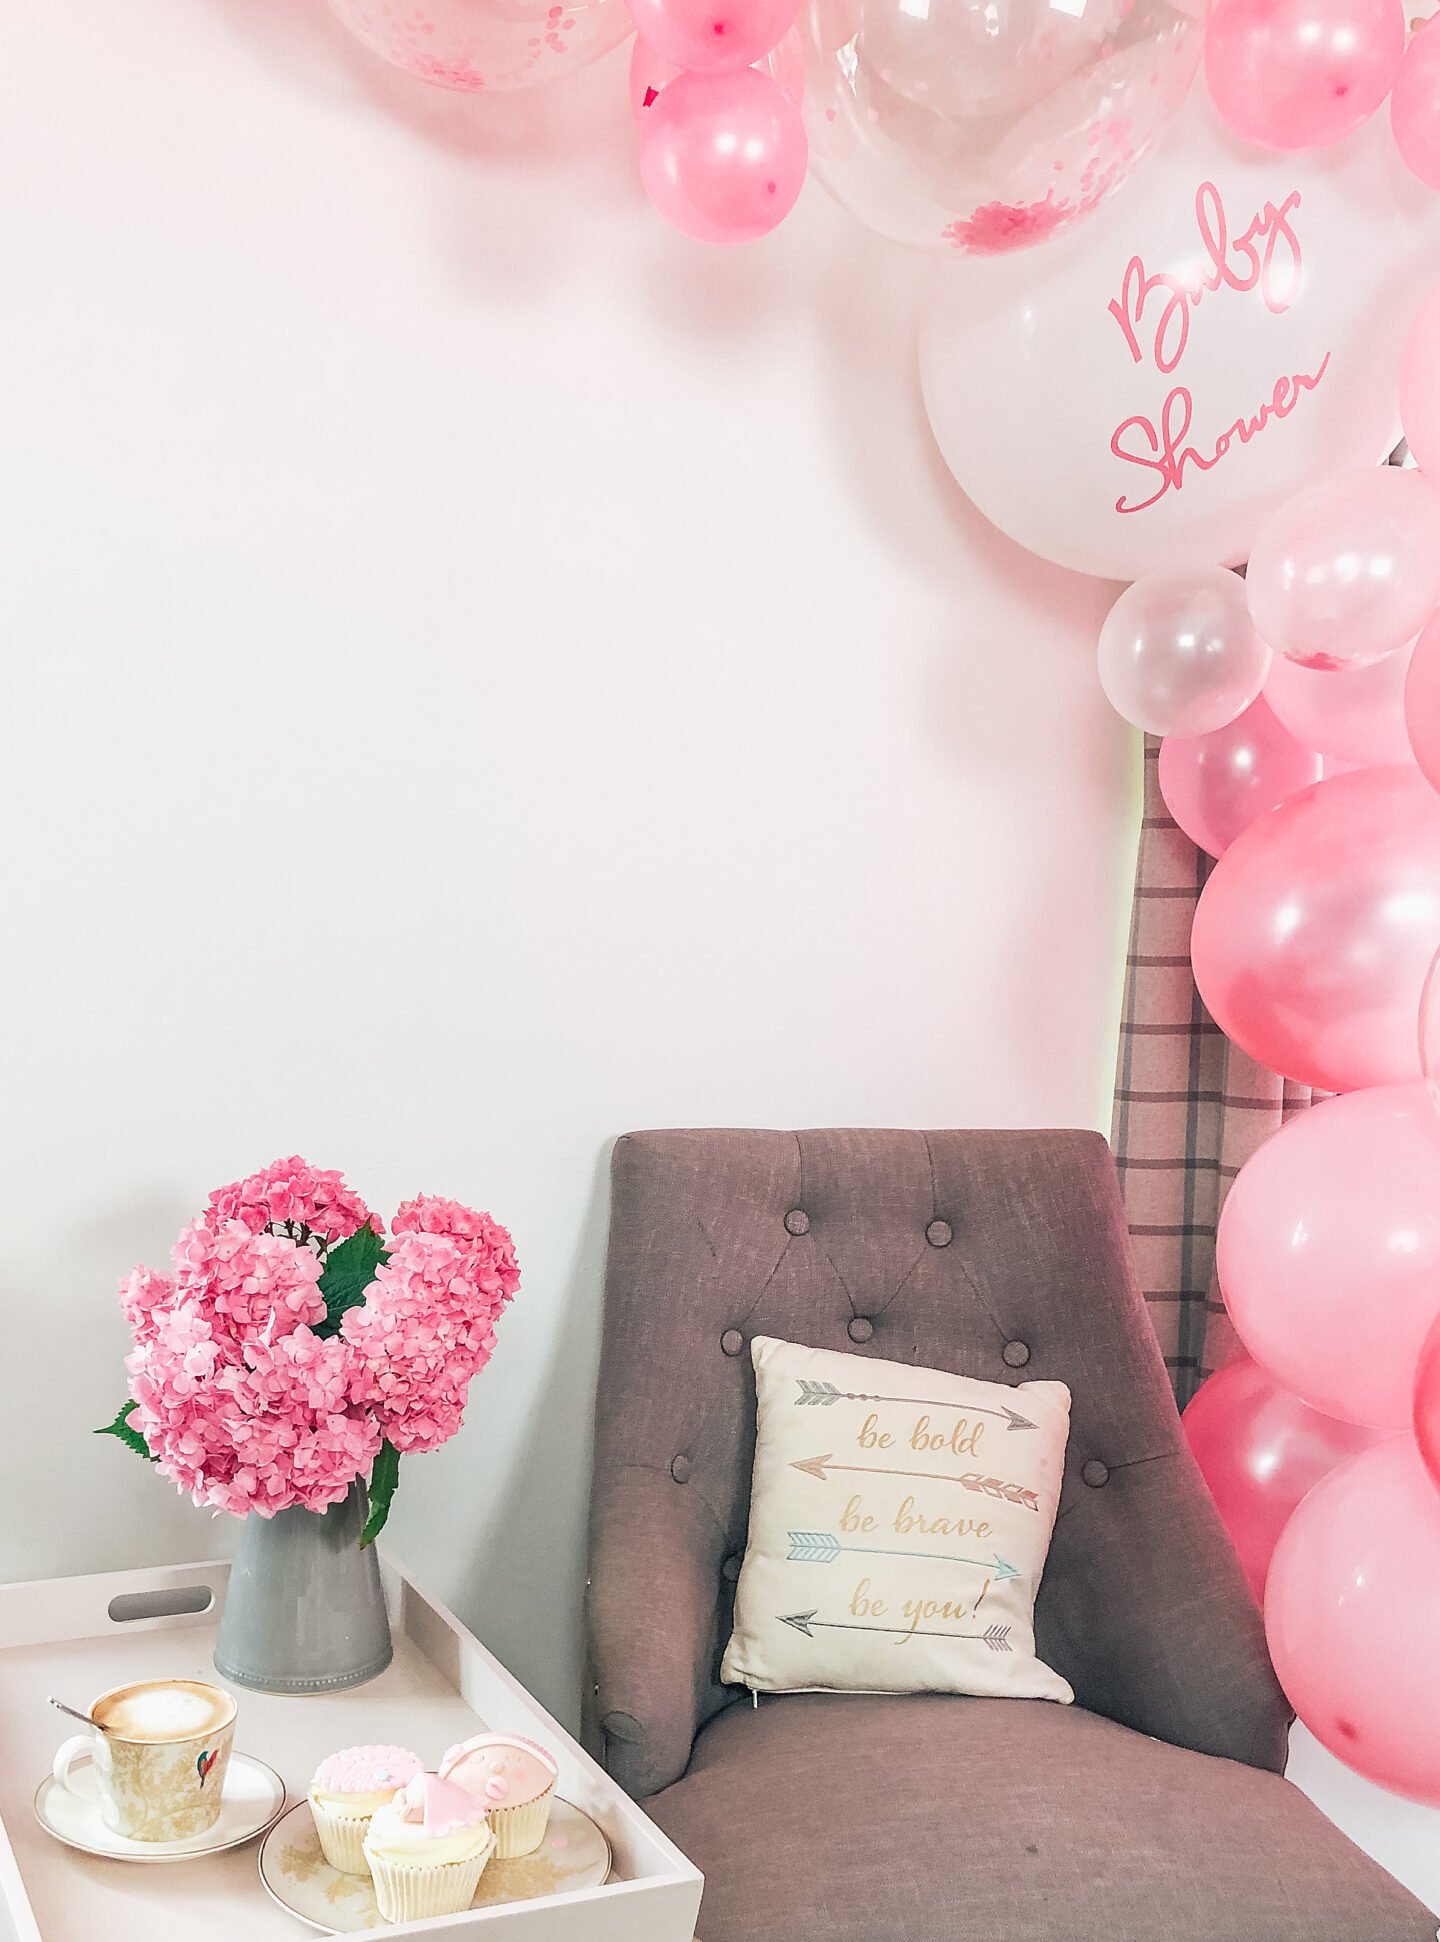 Baby shower afternoon how to make a balloon arch with Cricut vinyl balloon decals and  tape